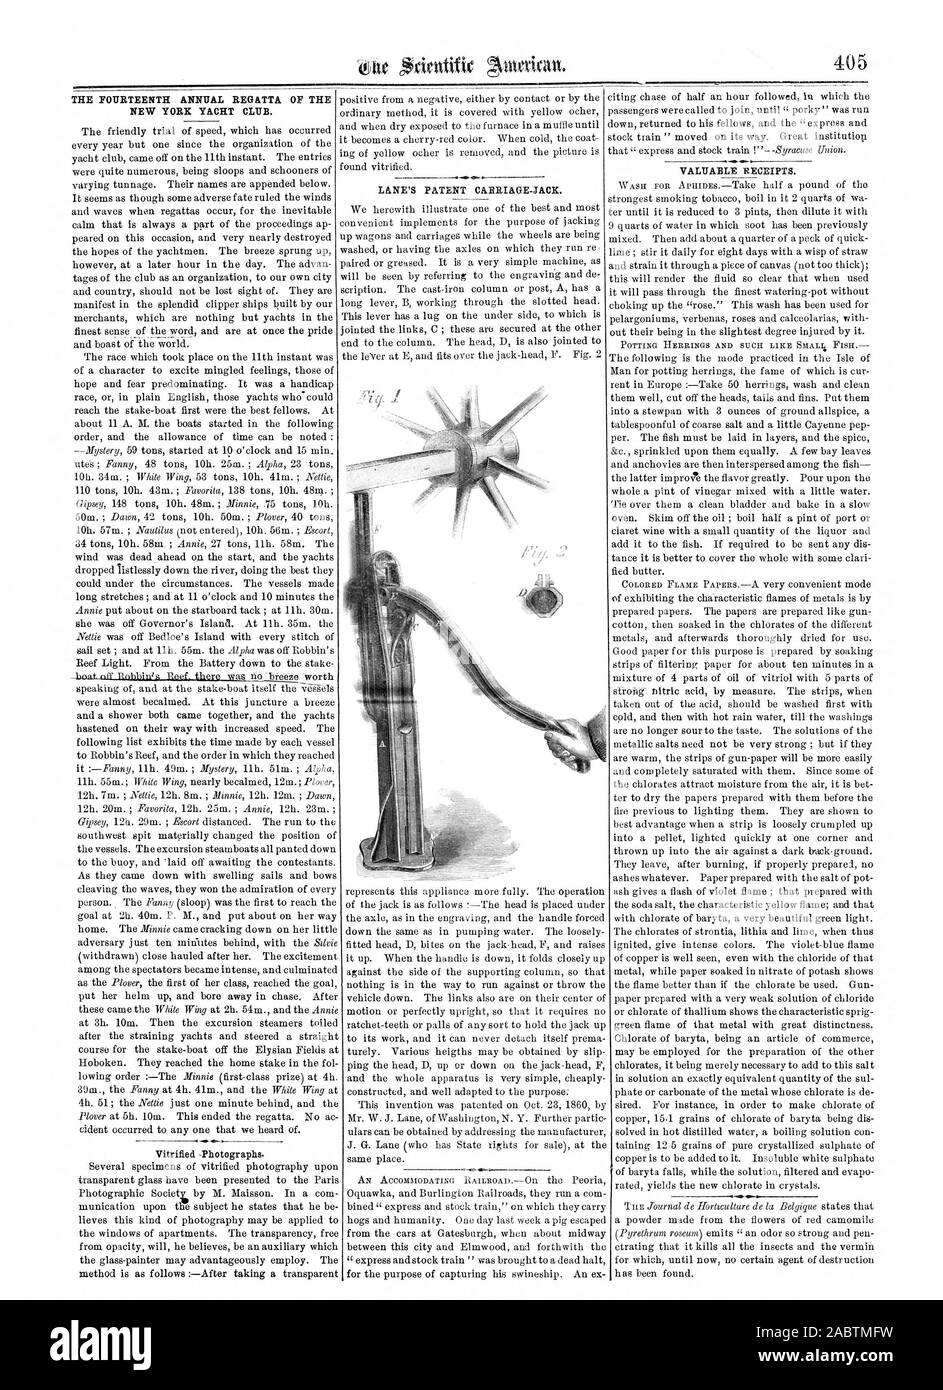 THE FOURTEENTH ANNUAL REGATTA OF THE NEW YORK YACHT CLUB. LANE'S PATENT CARRIAGE-JACK. VALUABLE RECEIPTS., scientific american, 1863-06-27 Stock Photo